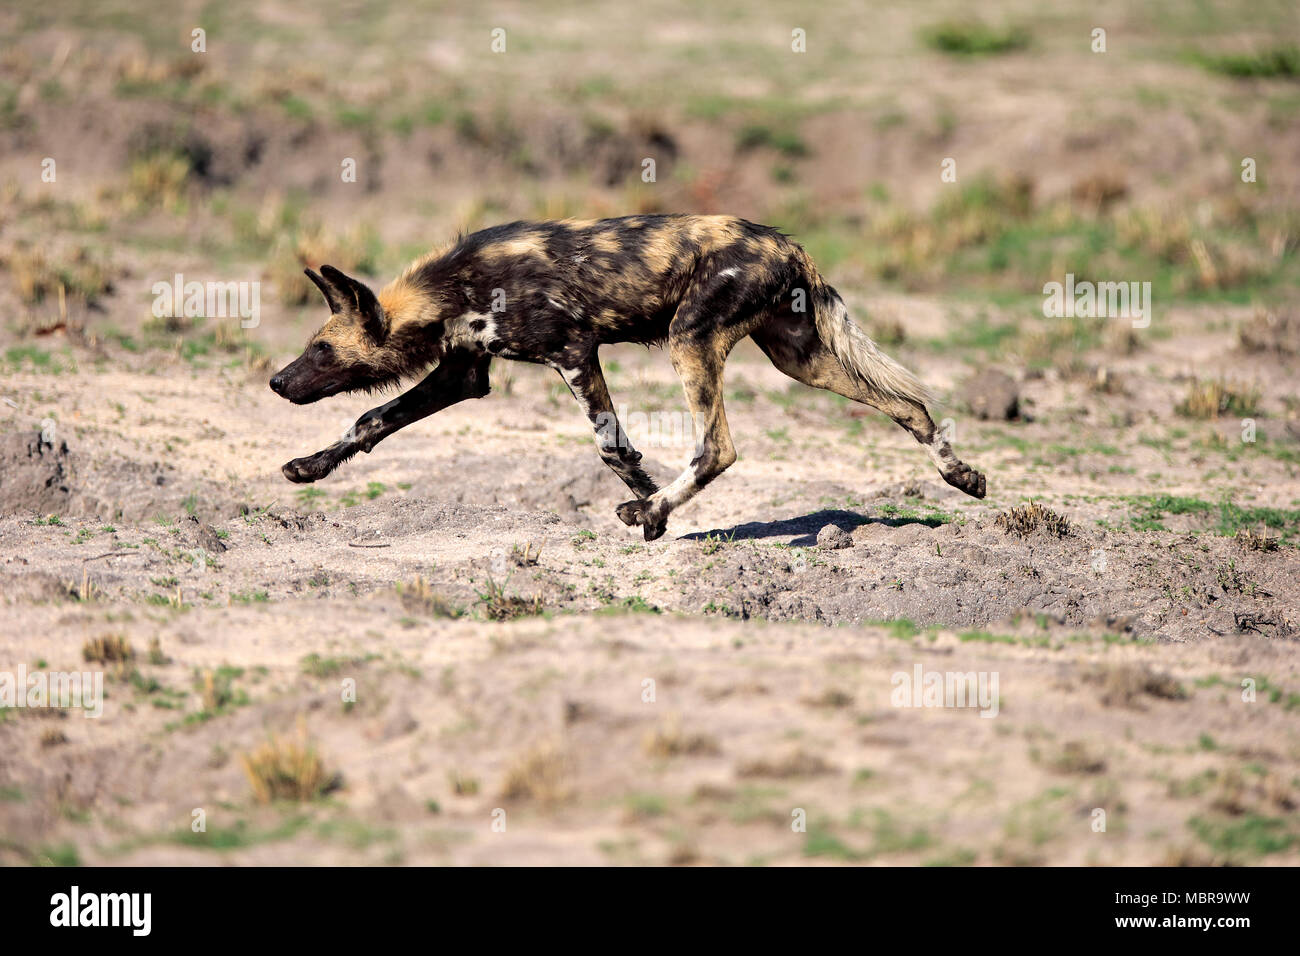 African wild dog (Lycaon pictus), adult, hunting, running, Sabi Sand Game Reserve, Kruger National Park, South Africa Stock Photo